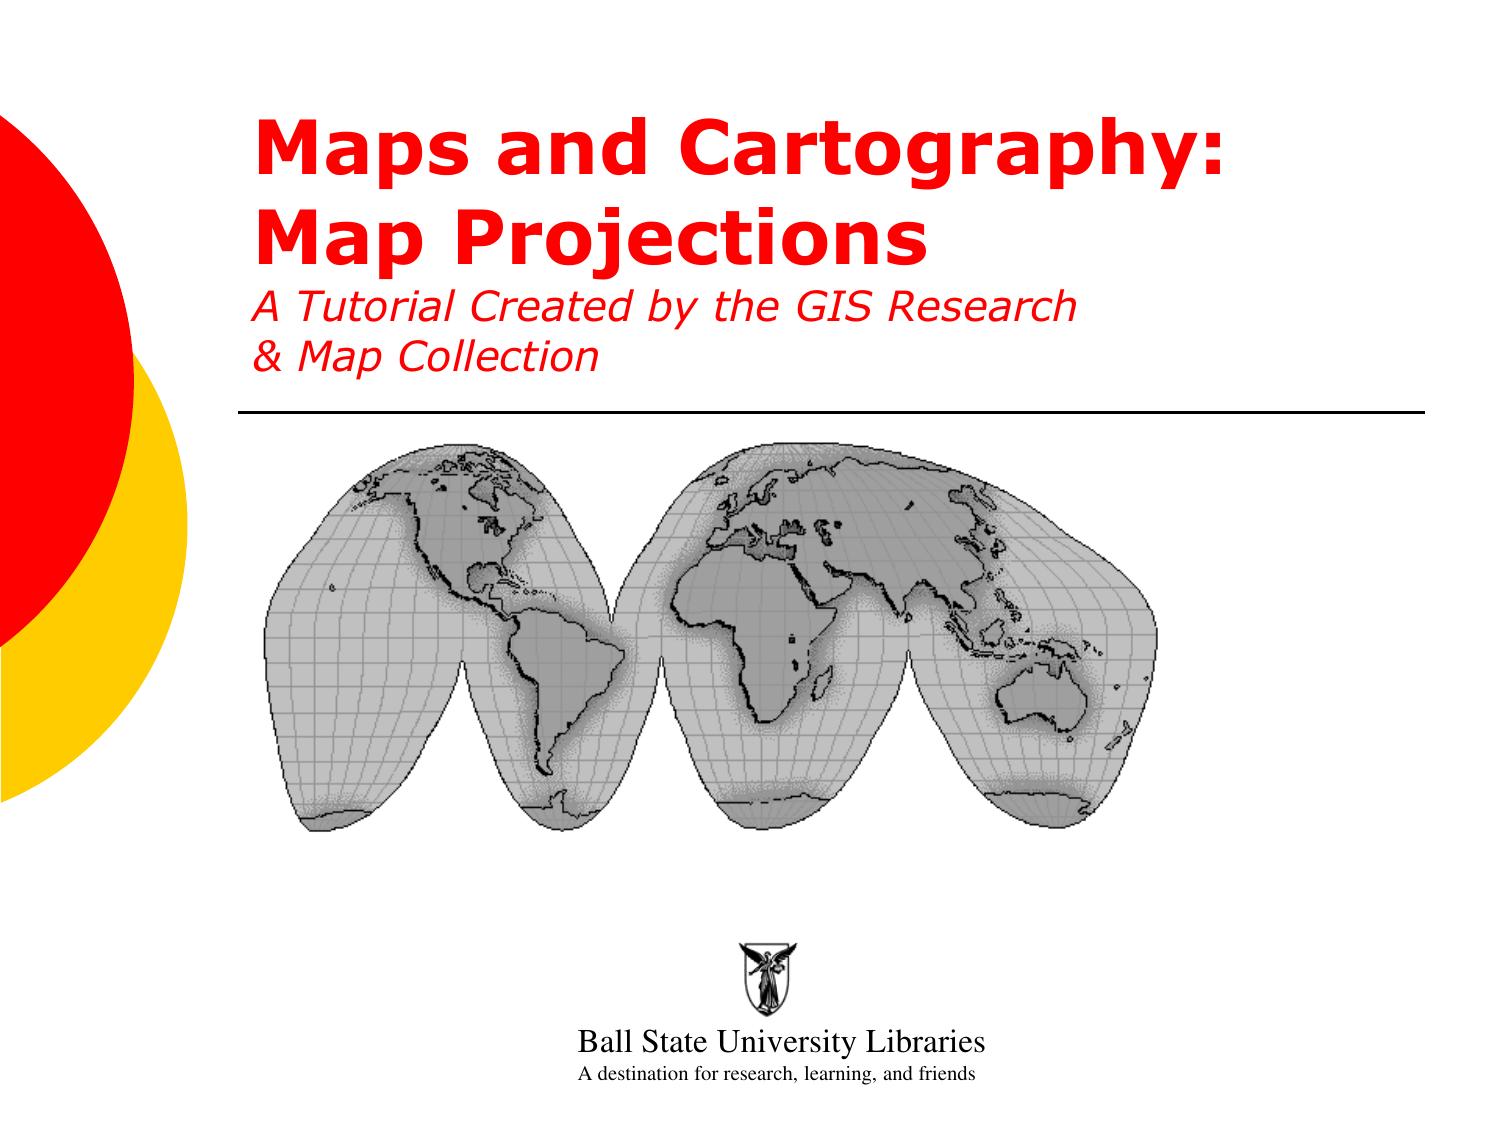 Maps and Cartography:  Map Projections